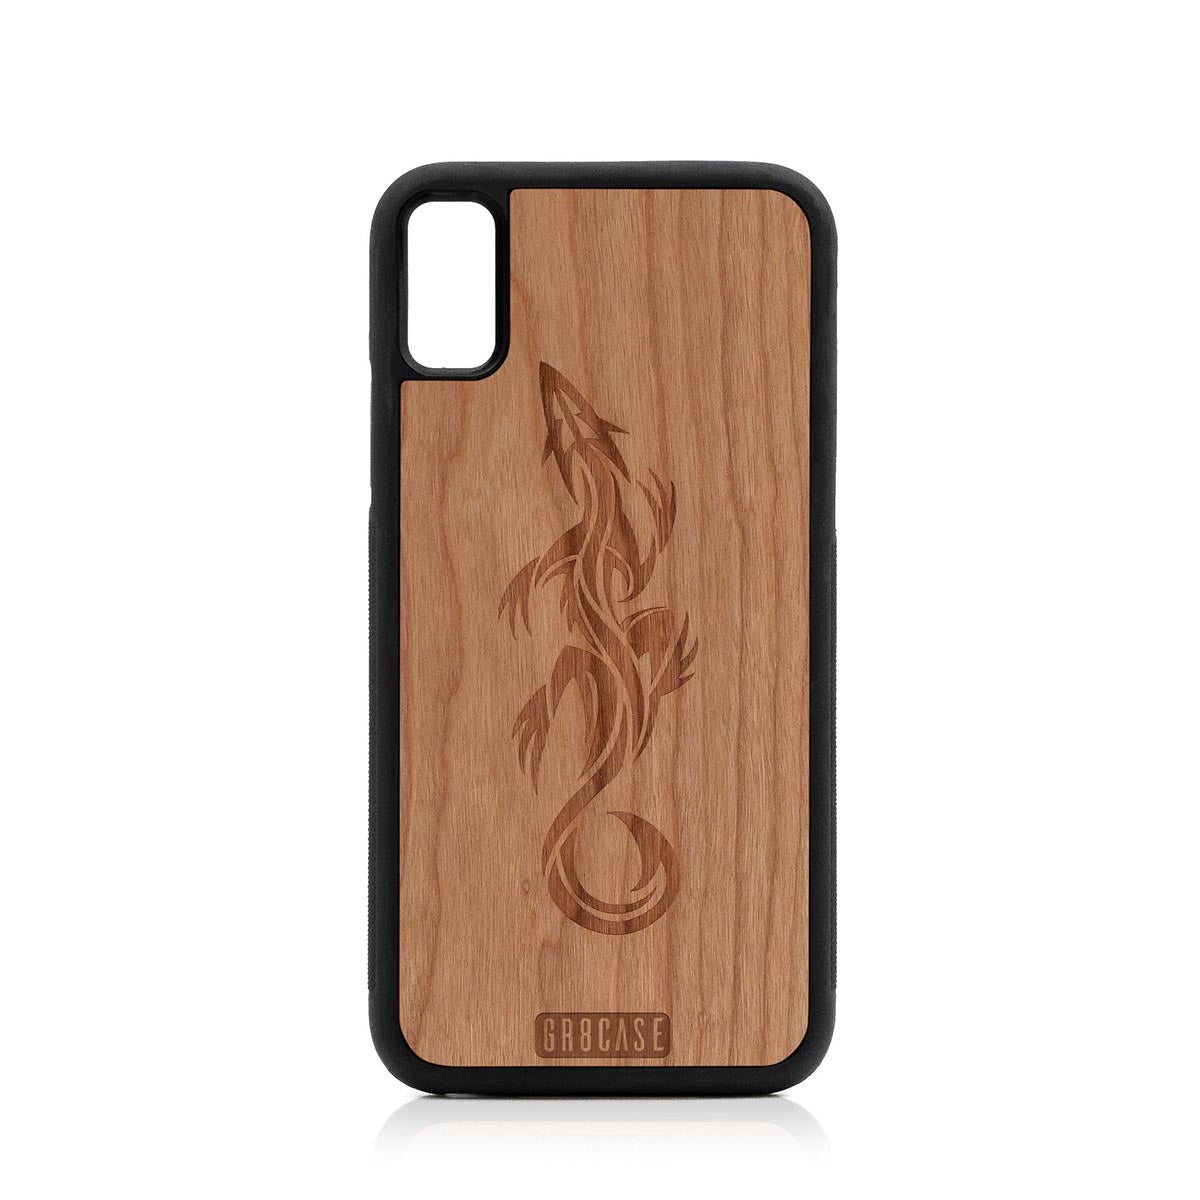 Lizard Design Wood Case For iPhone XR by GR8CASE